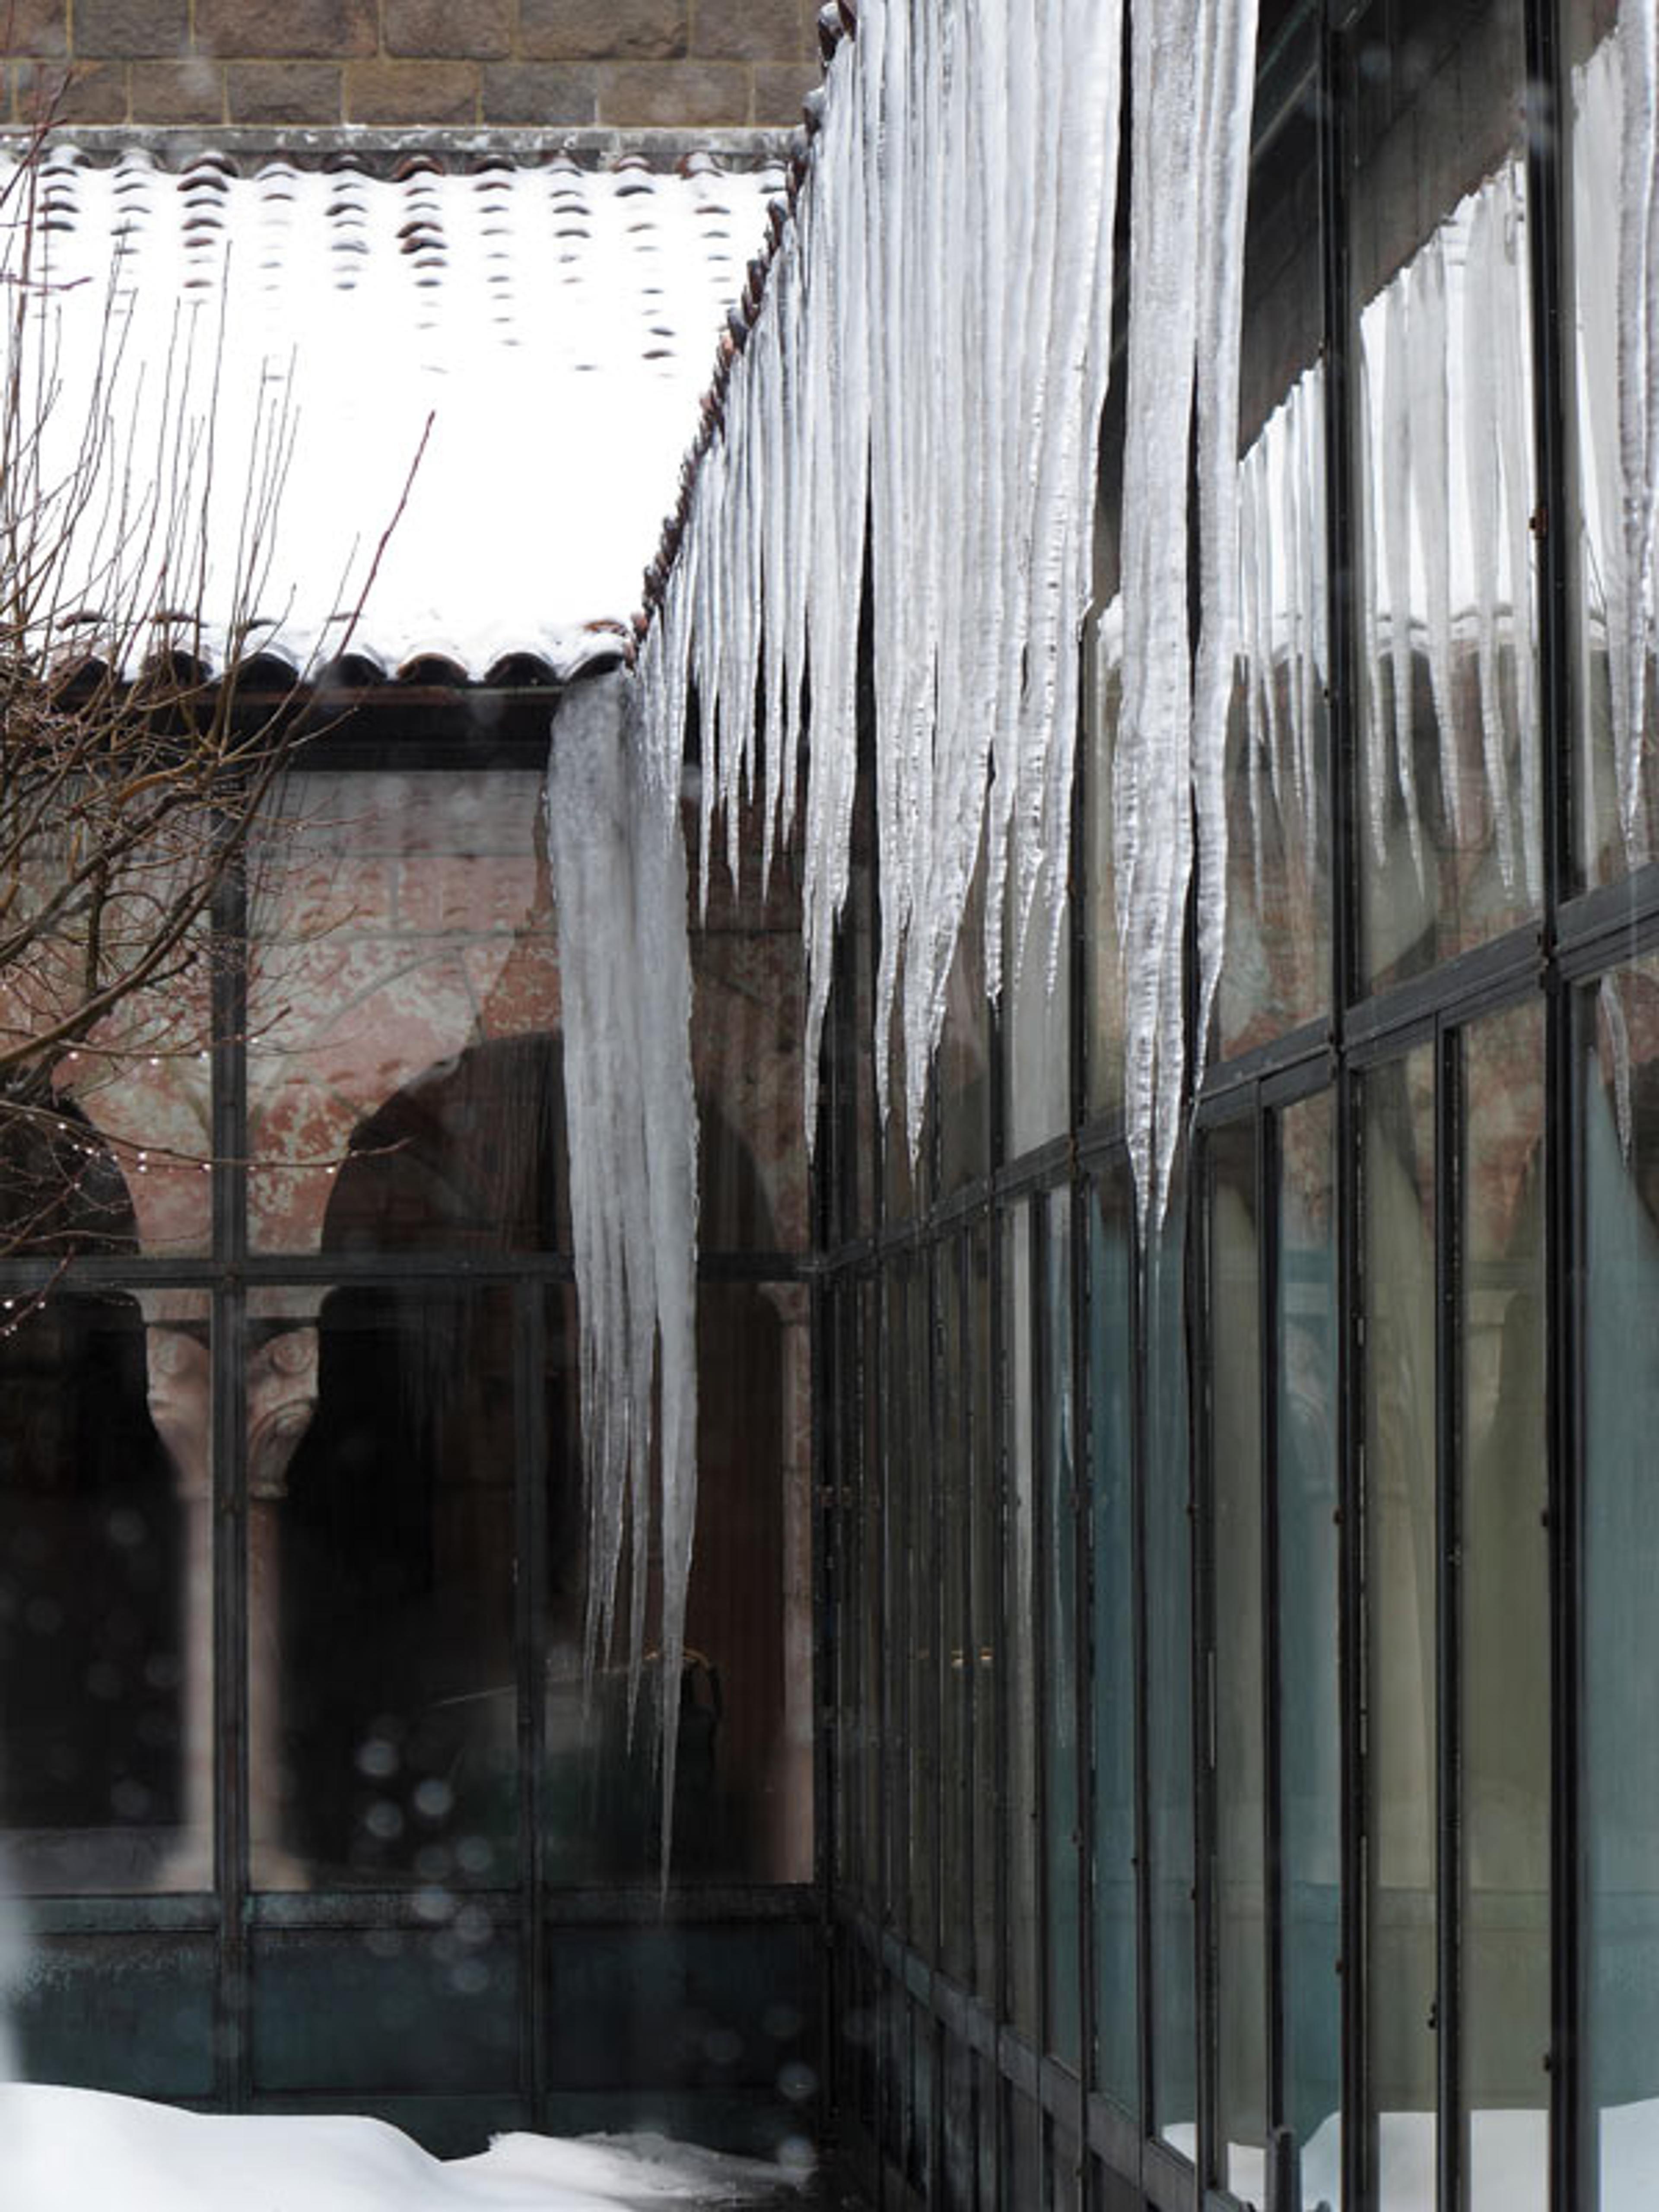 Icicles in the Cuxa Cloister